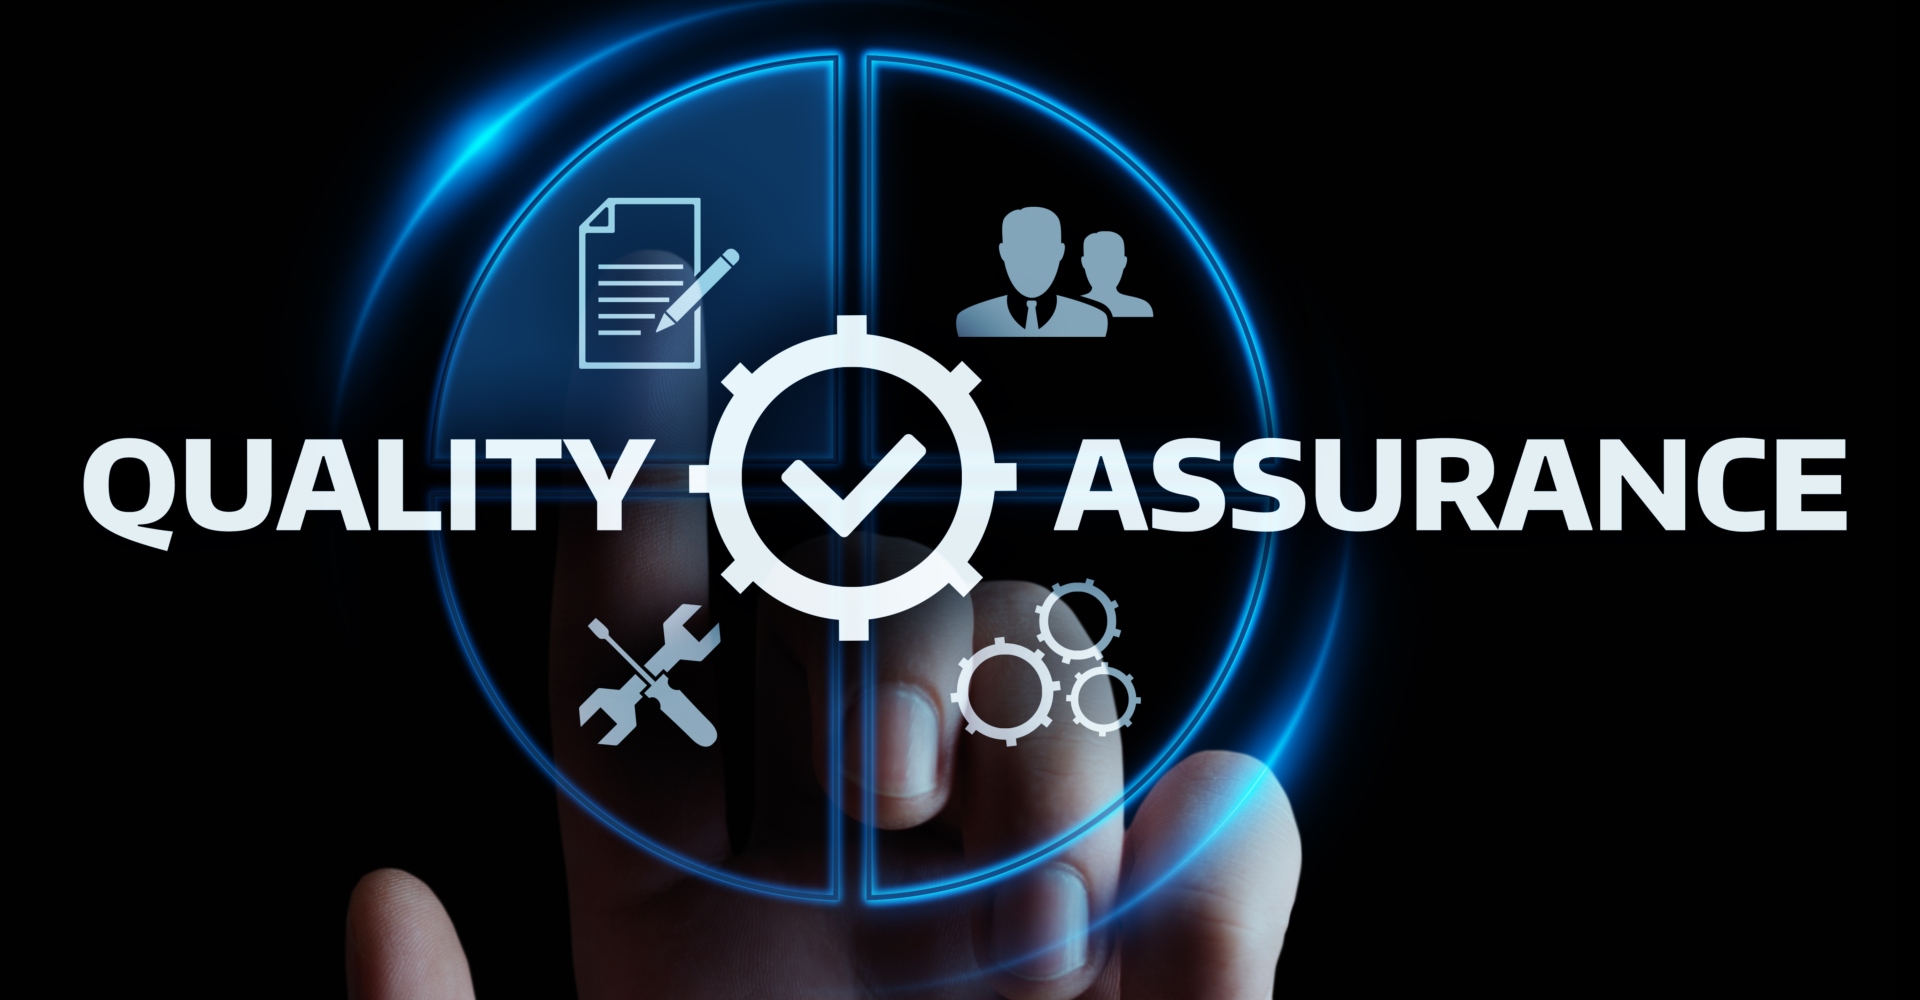 What Is Software Quality Assurance